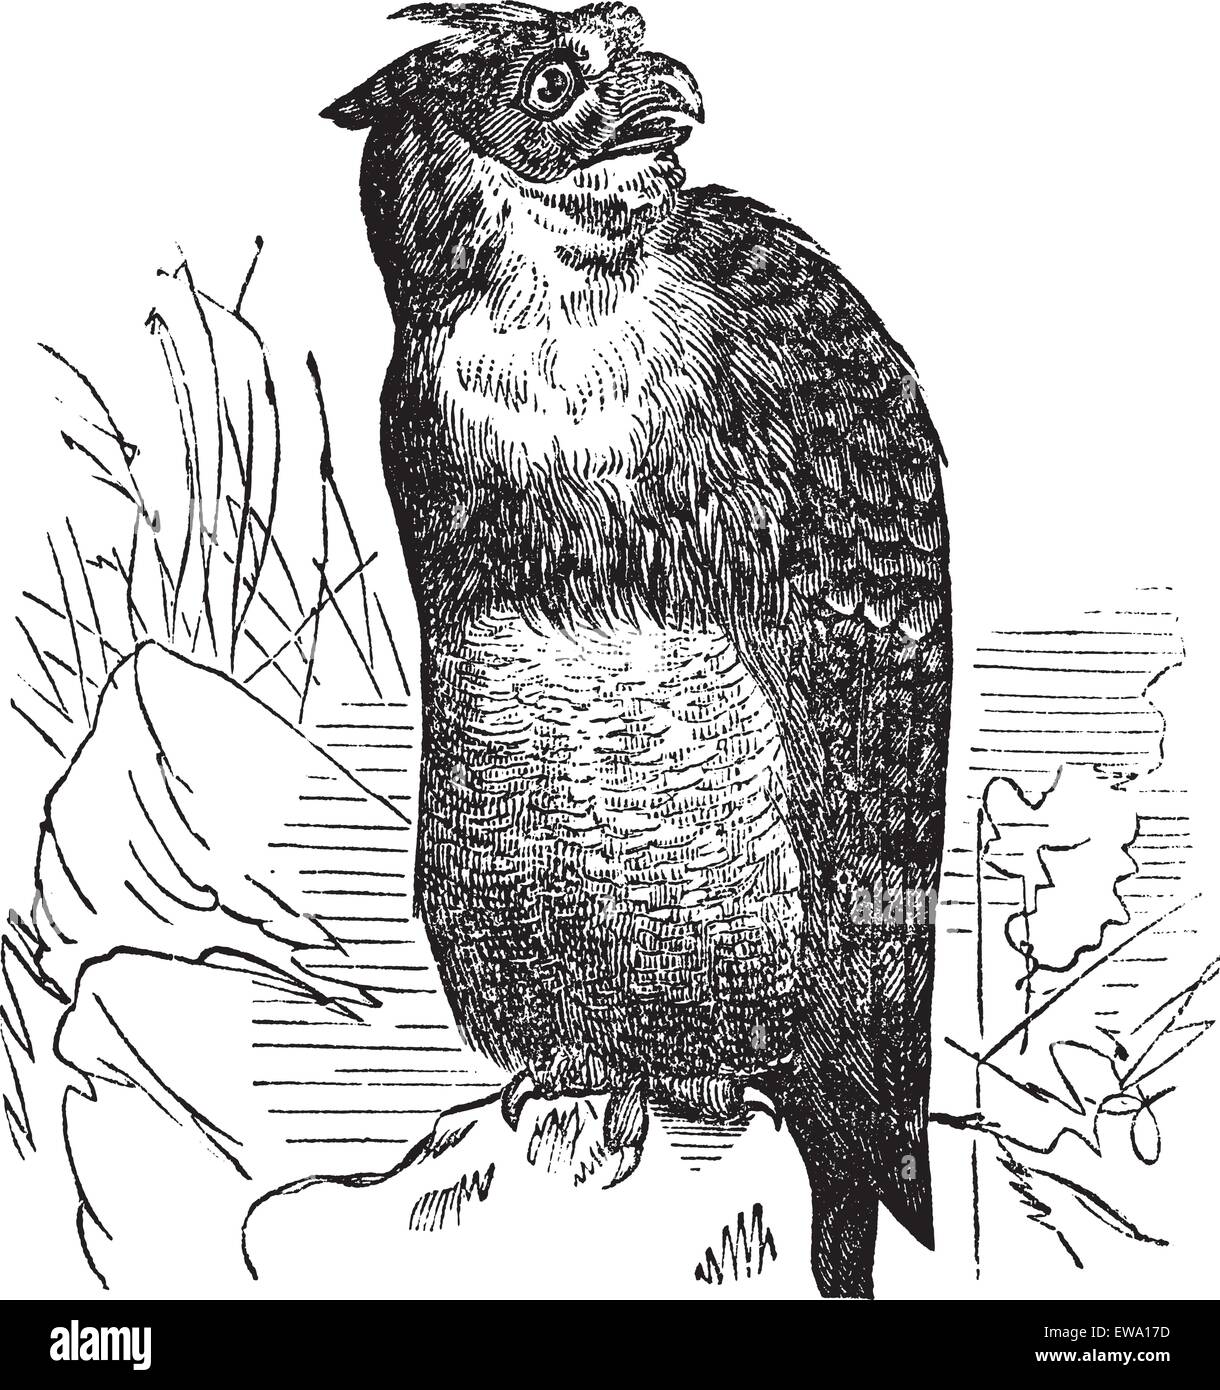 Great Horned Owl or Tiger Owl or Bubo virginianus, vintage engraving. Old engraved illustration of a Great Horned Owl. Stock Vector